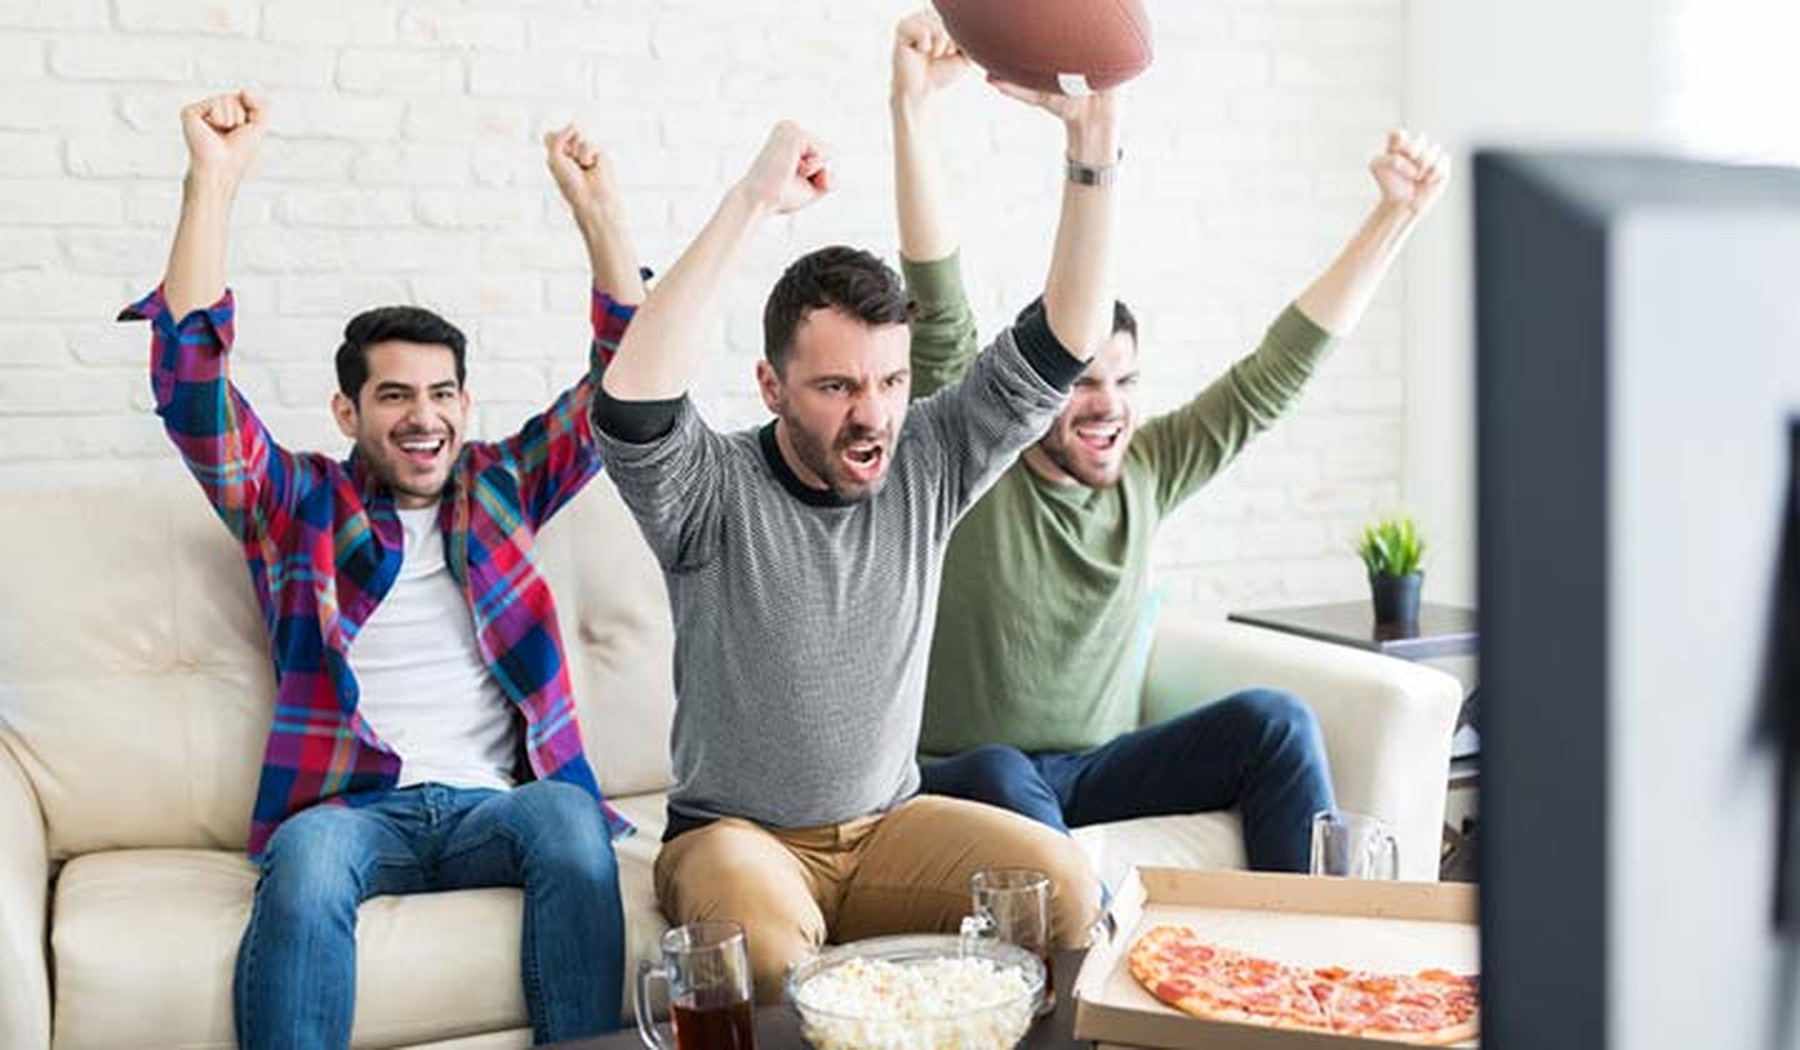 Young men holding footballs cheering while watching TV